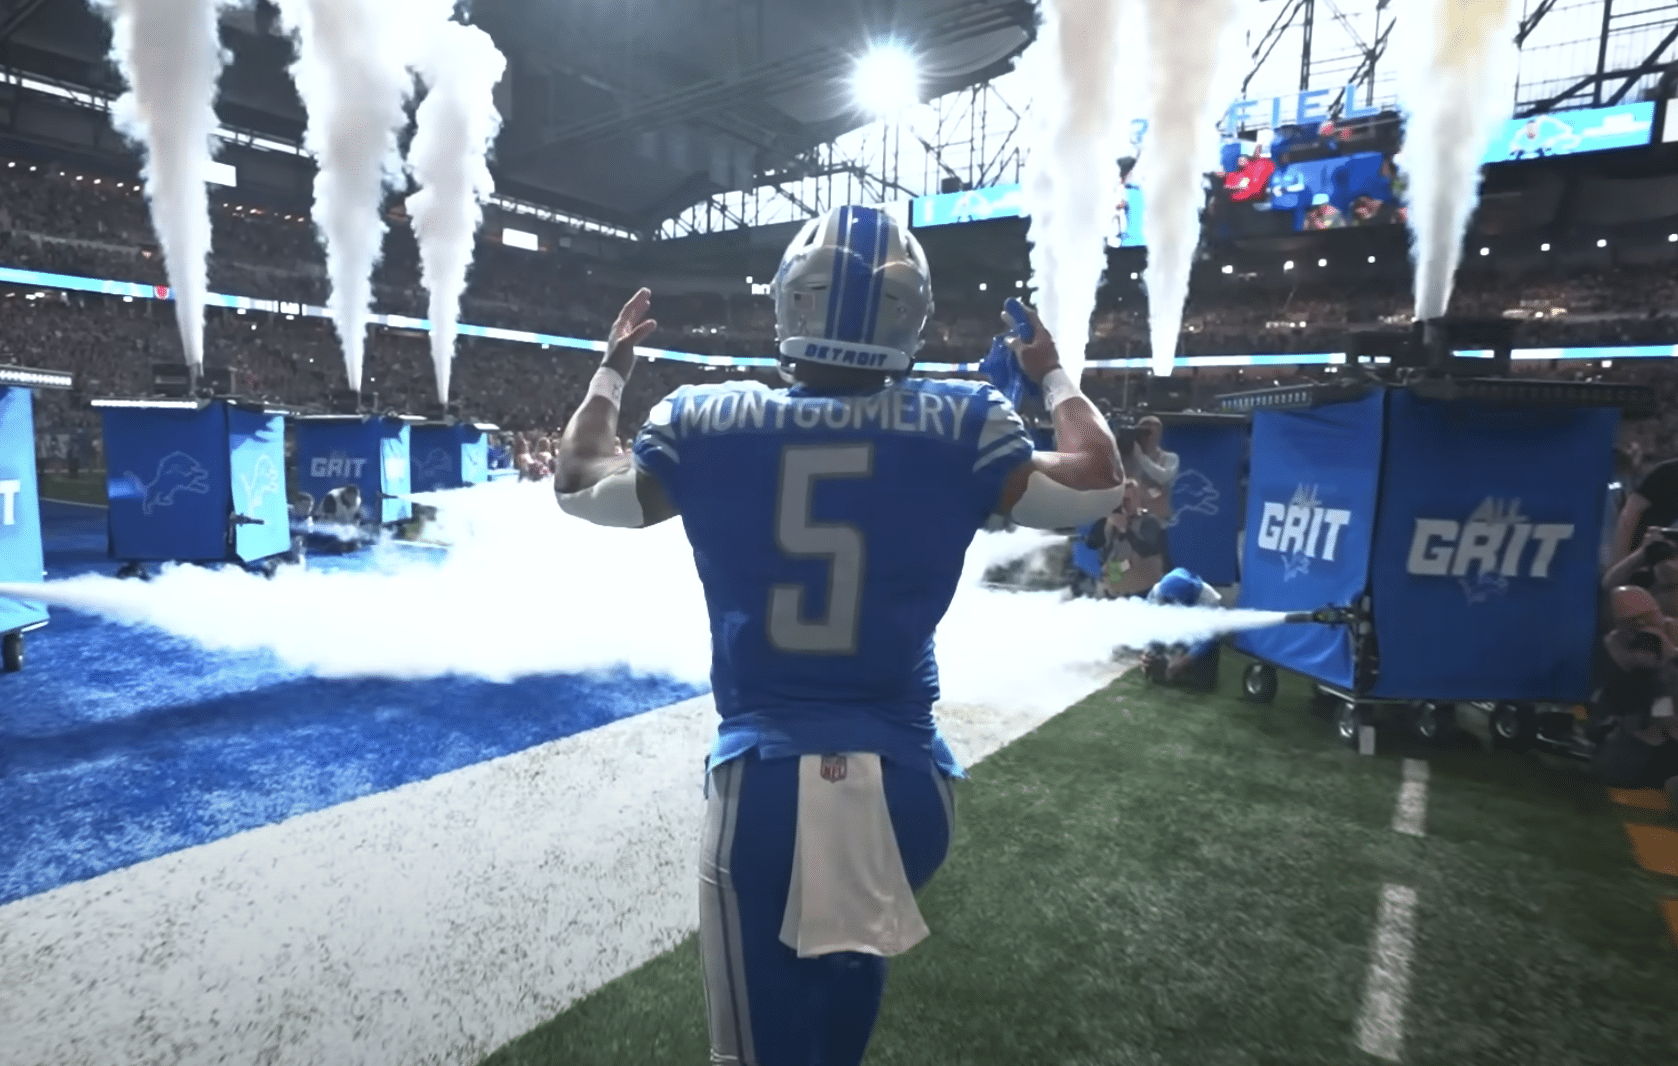 Detroit Lions Week 15 Rooting Guide David Montgomery and Jahmyr Gibbs have shot at history